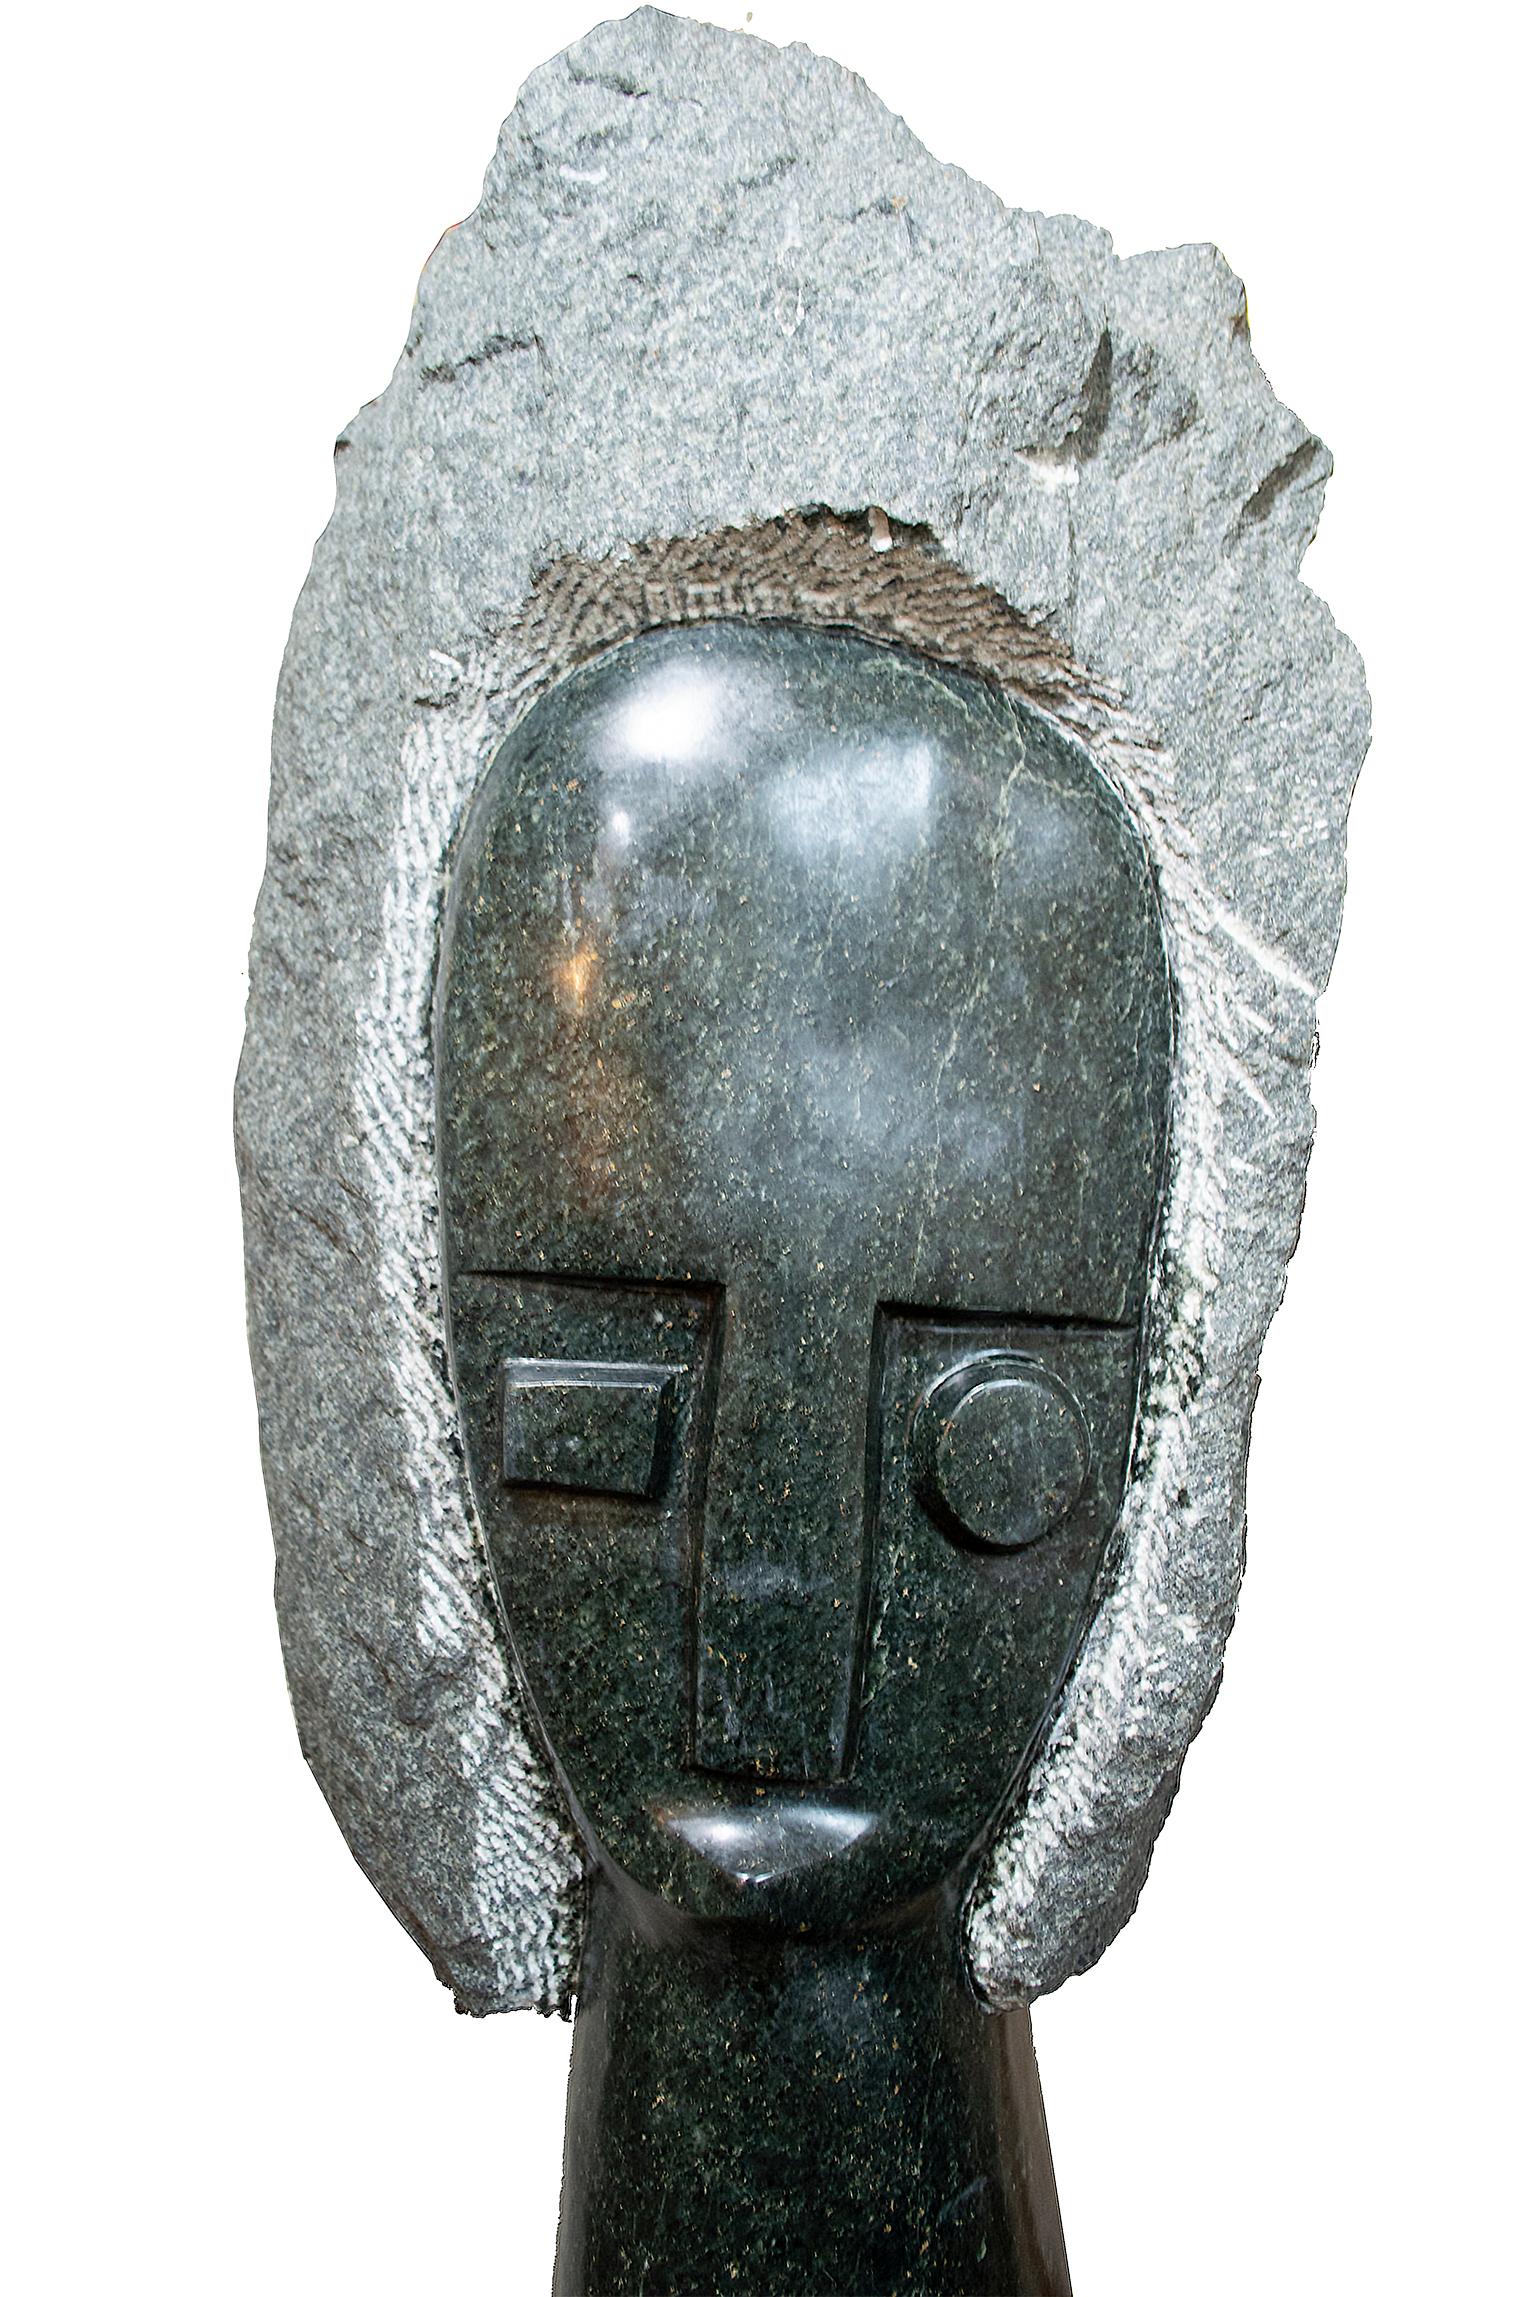 'African Queen' is an original opal serpentine stone sculpture signed by the contemporary Zimbabwean artist Chenjerai Chiripanyanga. The sculpture itself stands tall and proud like a totem, the queen's head atop. The treatment of the stone